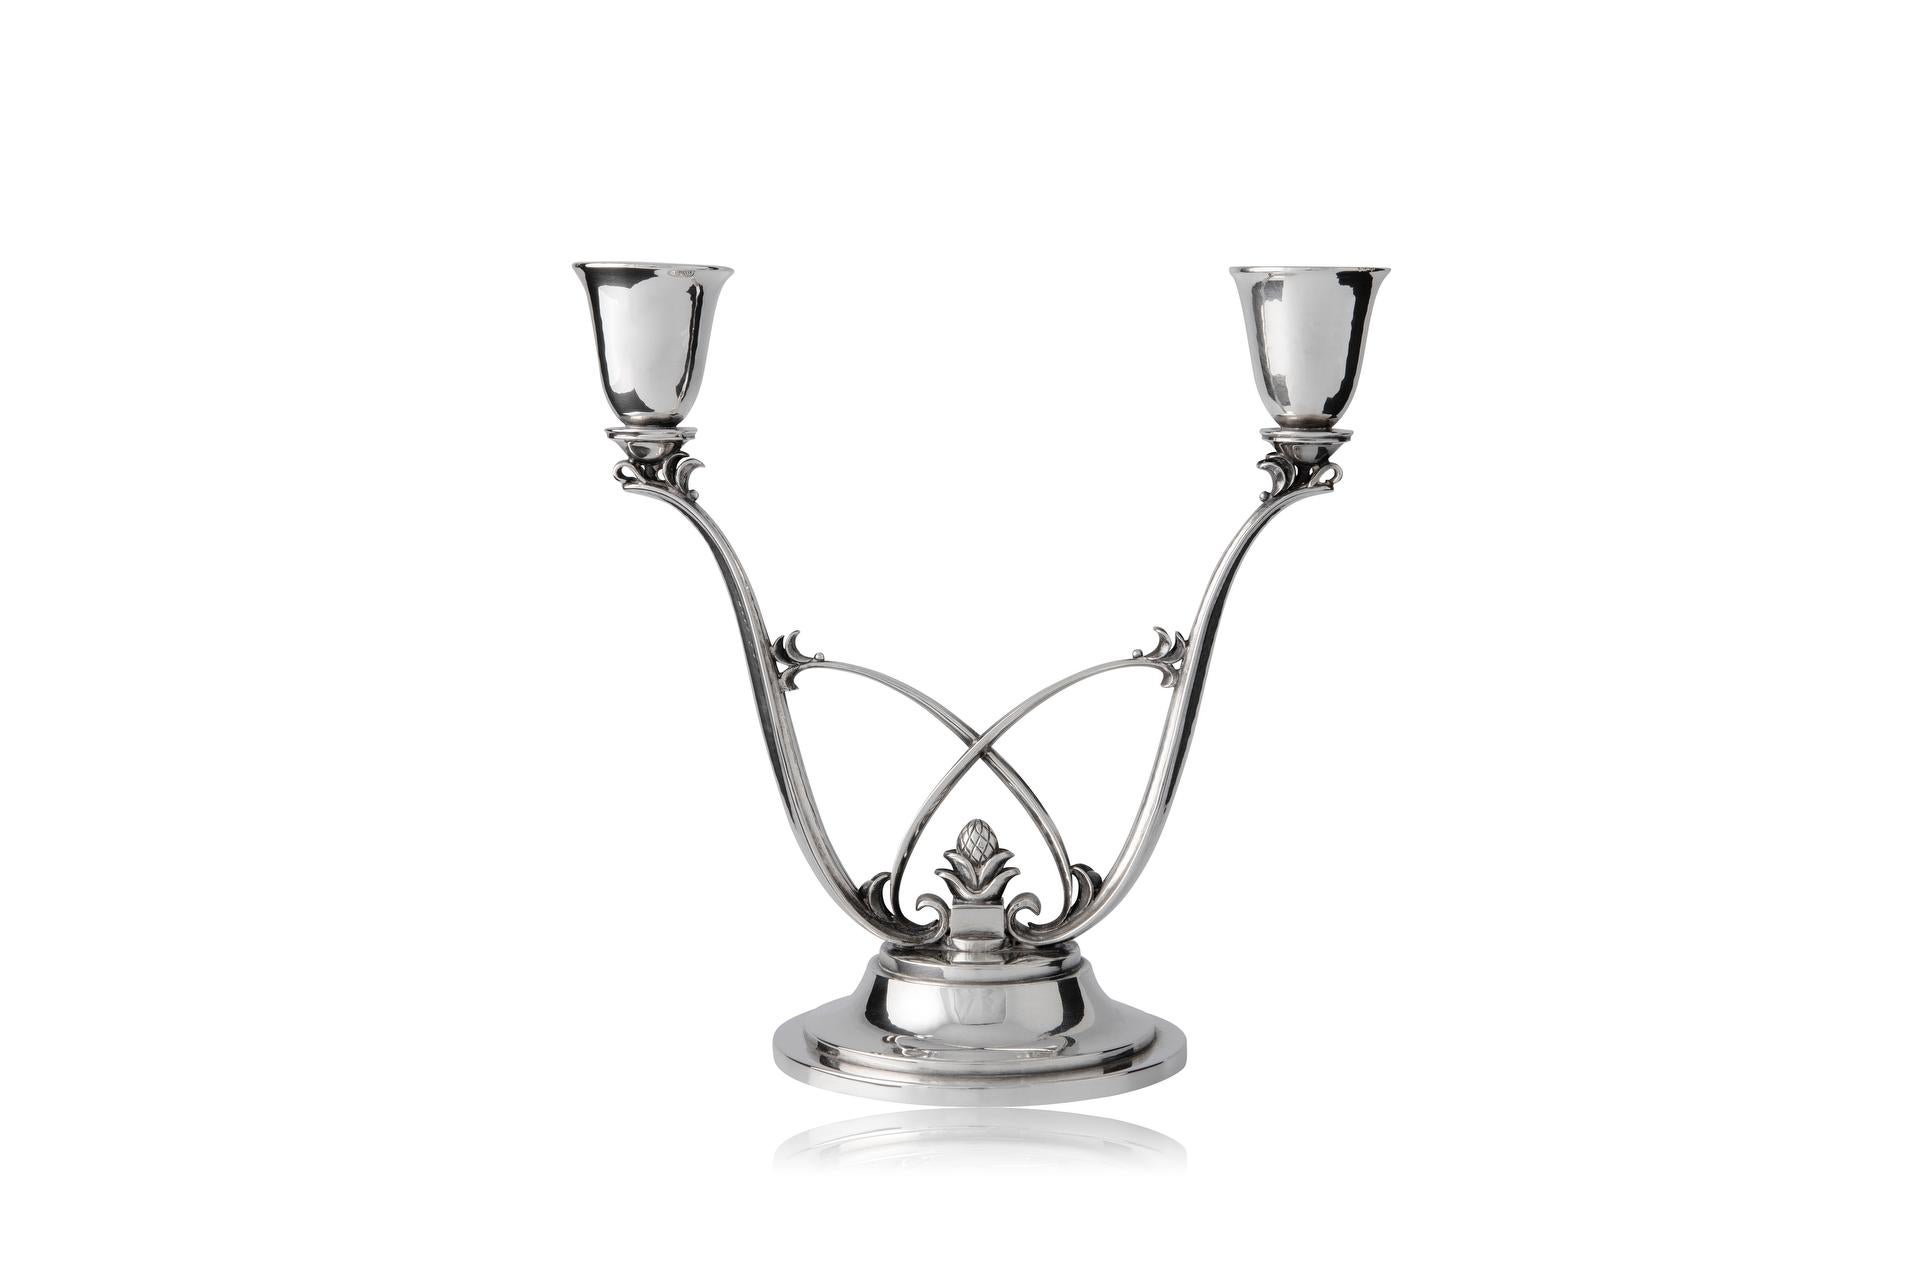 A pair of vintage Georg Jensen sterling silver two-light candelabra, design #619 by Harald Nielsen from circa 1930.

Additional information:
Material: Sterling silver
Styles: Art Deco
Hallmarks: Vintage Georg Jensen hallmarks from 1945-1977 and